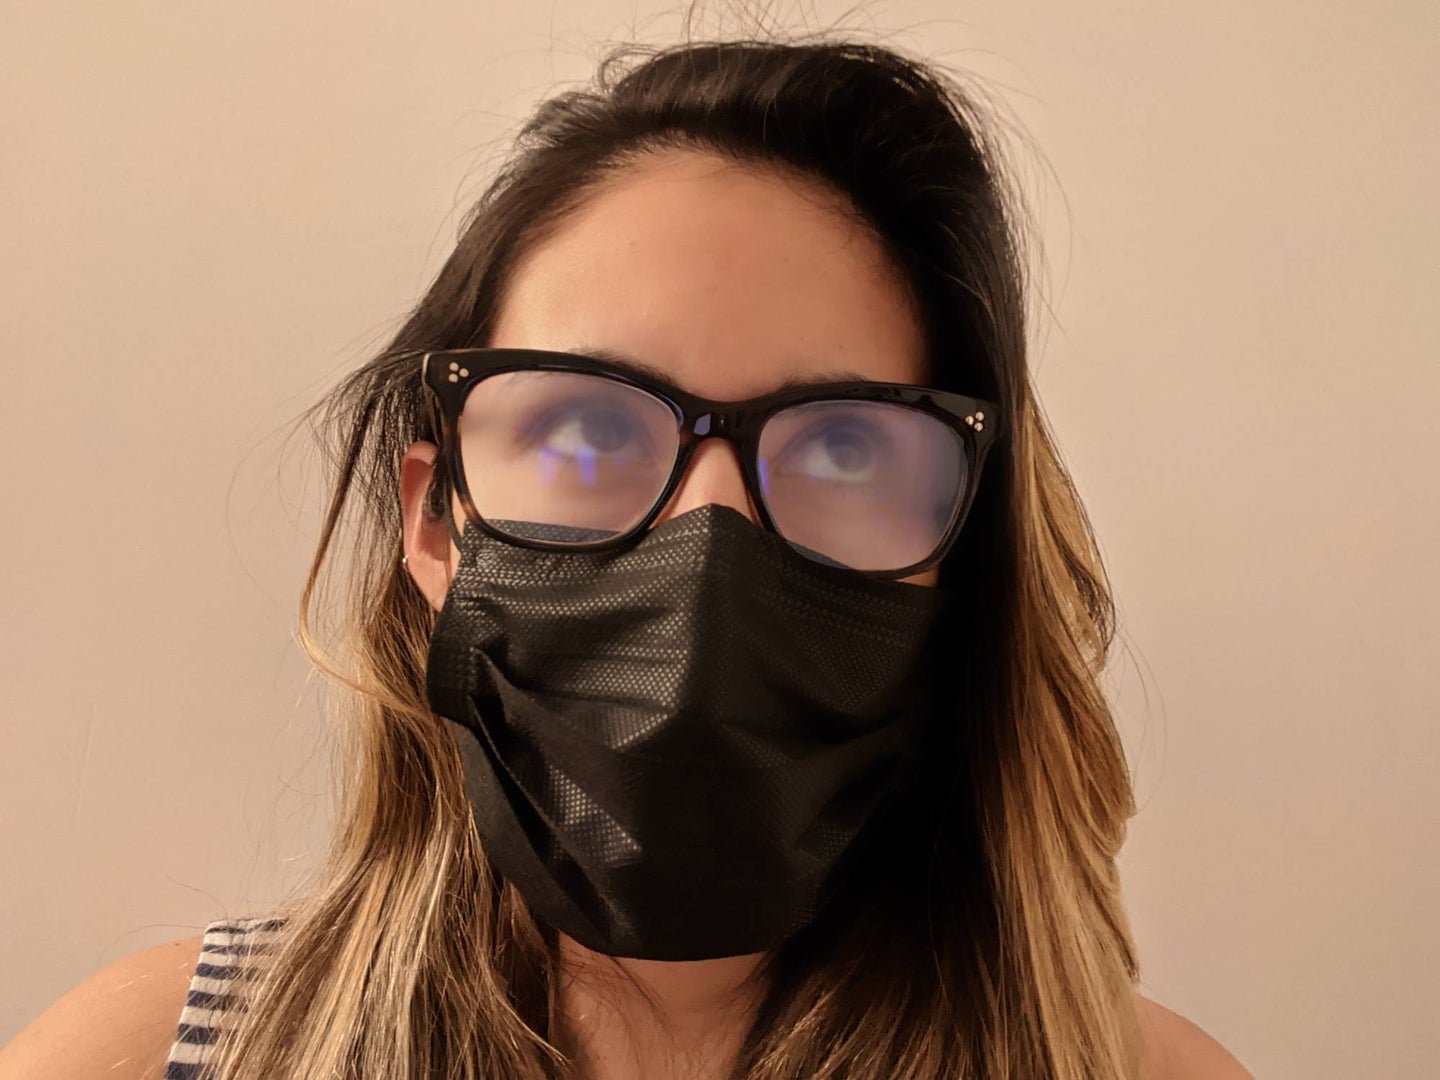 5 ways to keep your glasses from fogging up with a mask